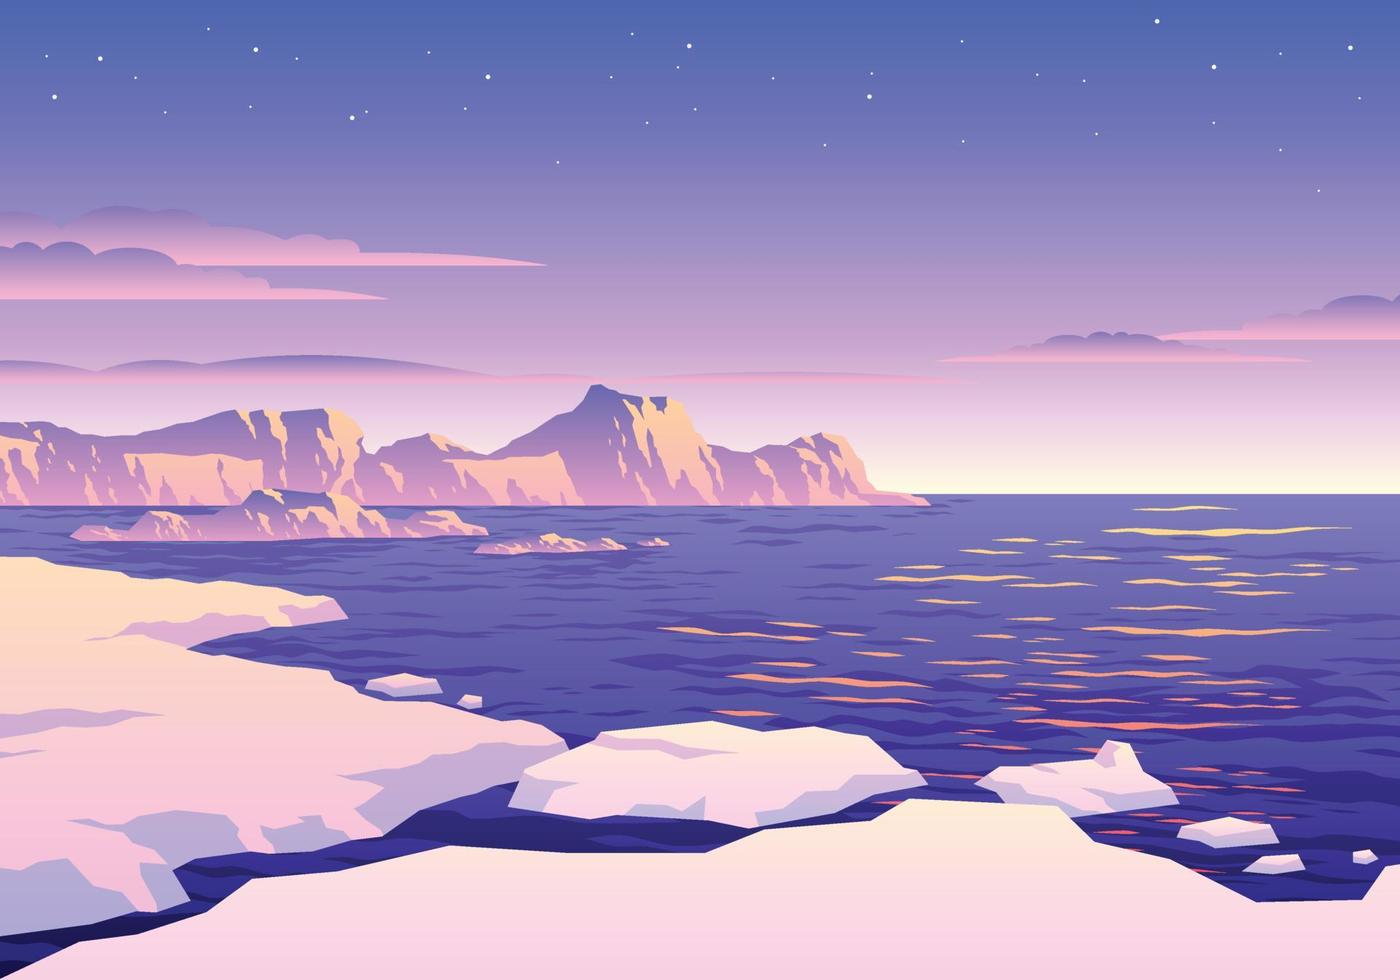 Arctic landscape with icebergs and mountains on the horizon - Low poly